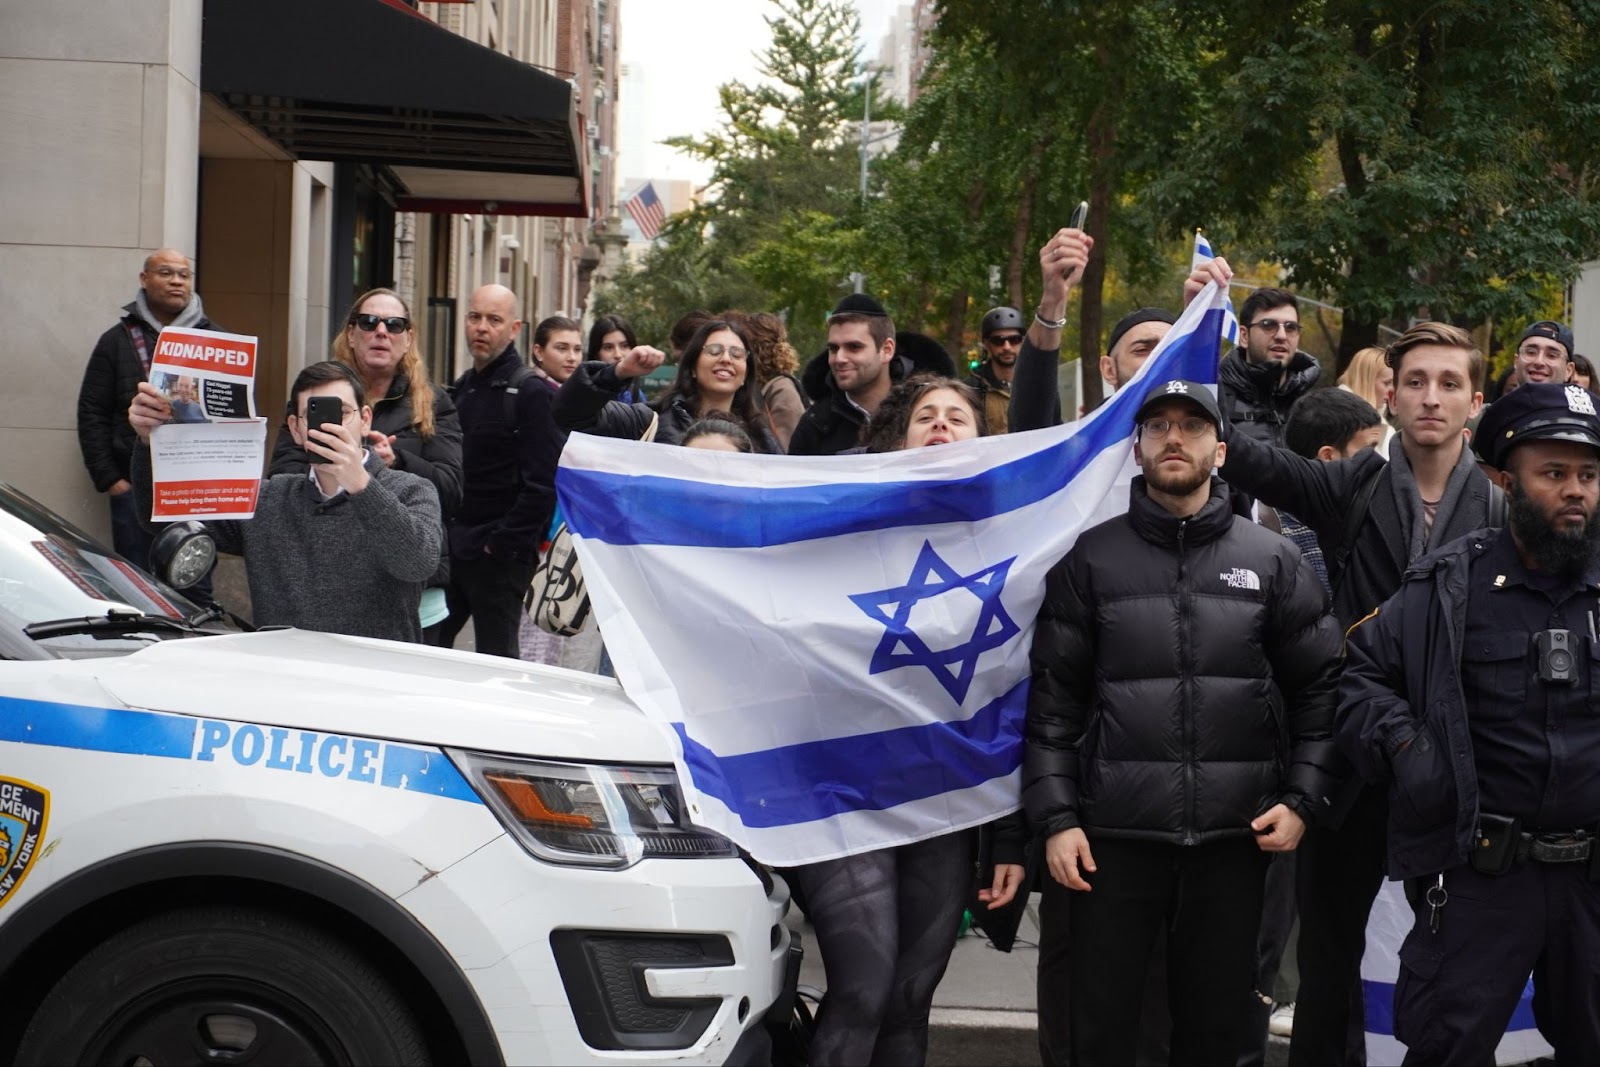 People gathered across from the University Center on East 13th St, holding up an Israeli flag.